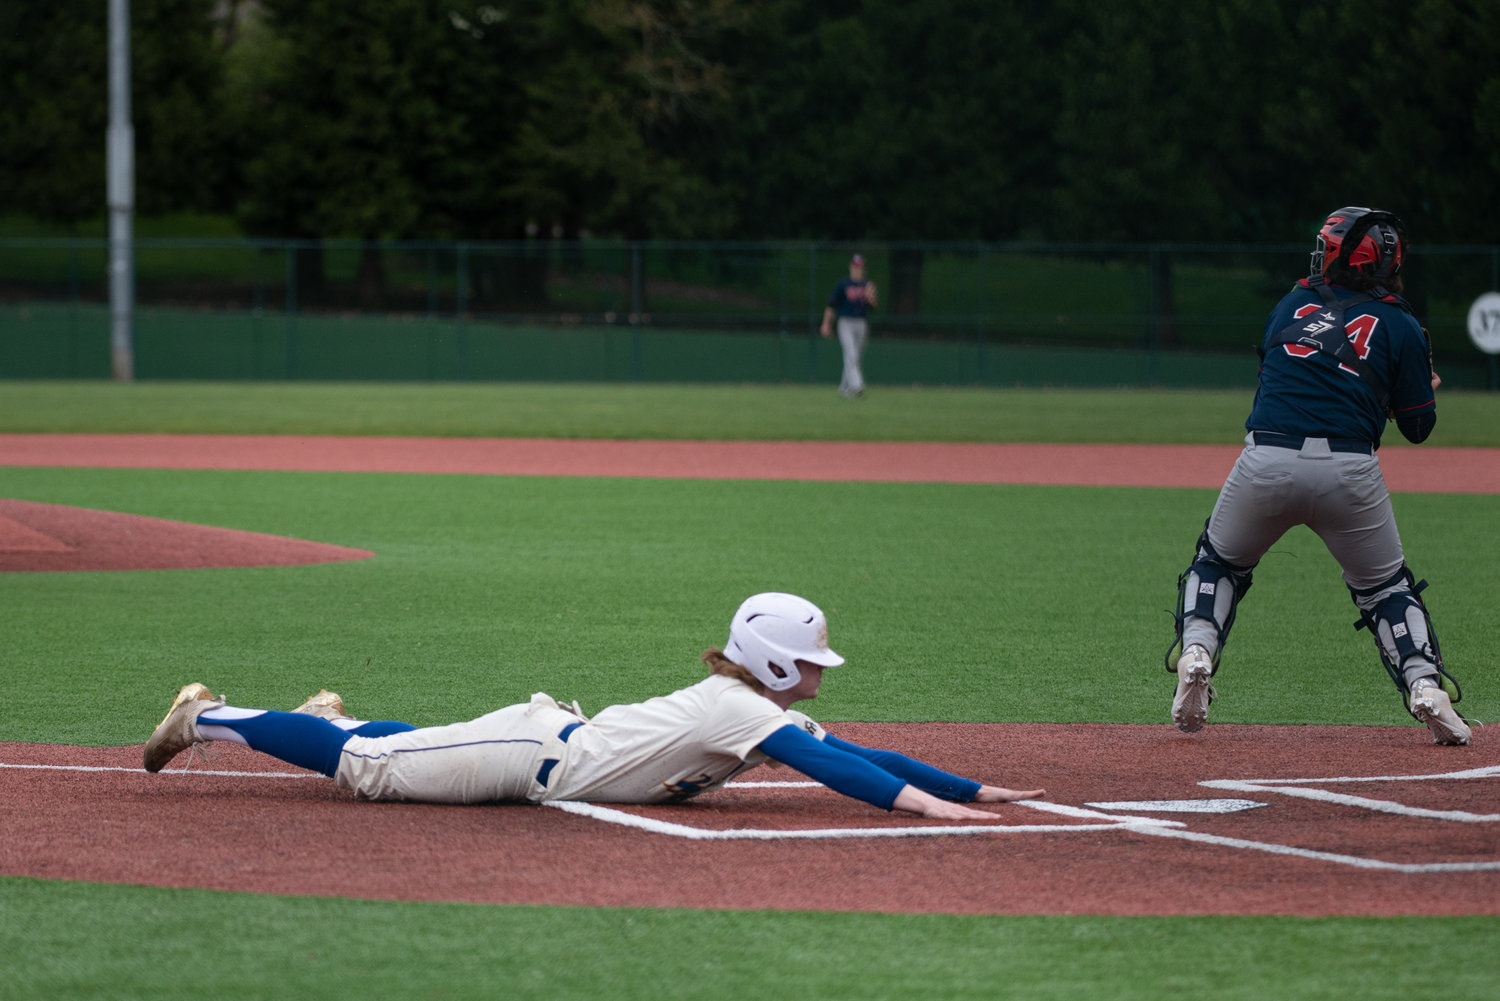 Rochester's Braden Hartley slides home against Black Hills in a play-in game at the Regional Athletic Complex in Lacey May 6.